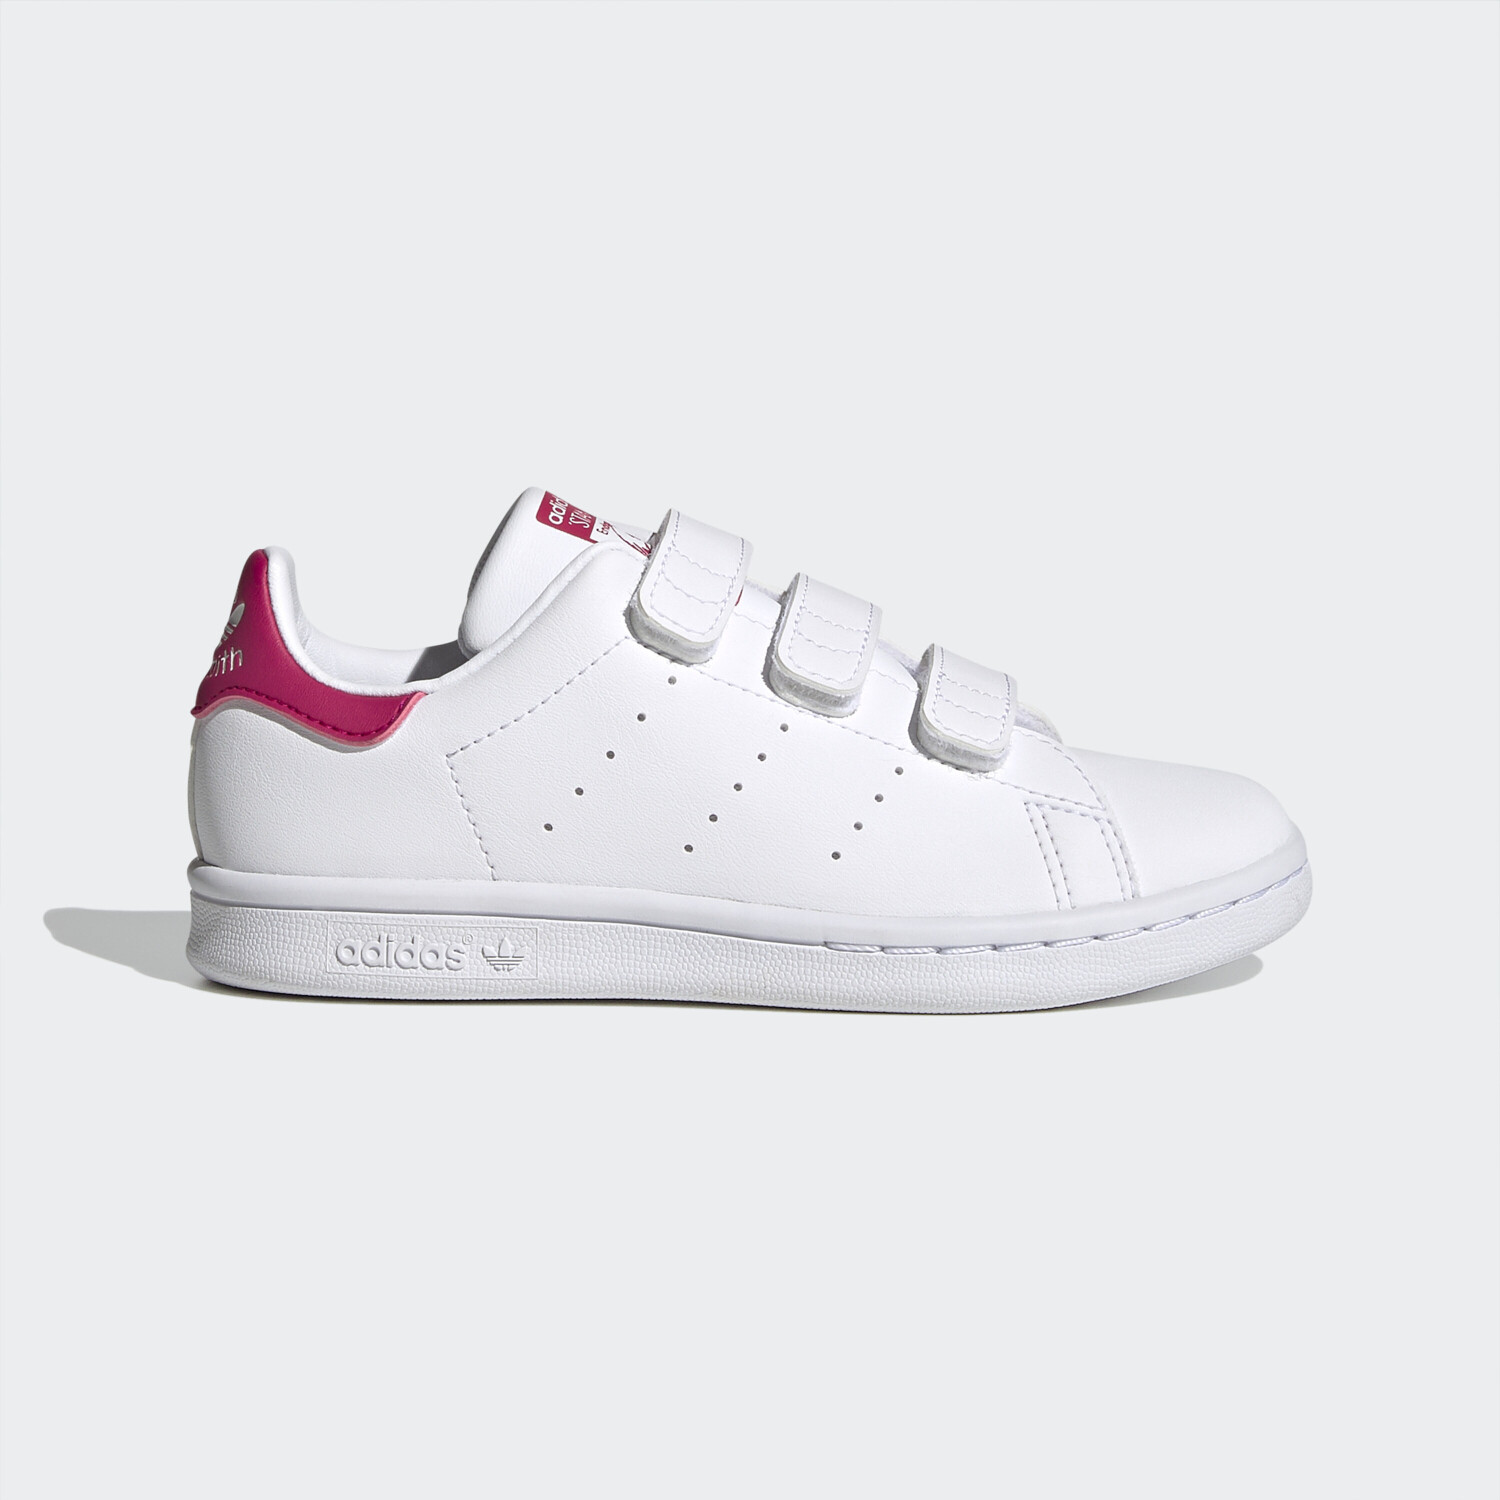 Buy Adidas (Today) Kinder Best from Smith on Deals White/Bold Pink White/Cloud Cloud Stan £32.50 –